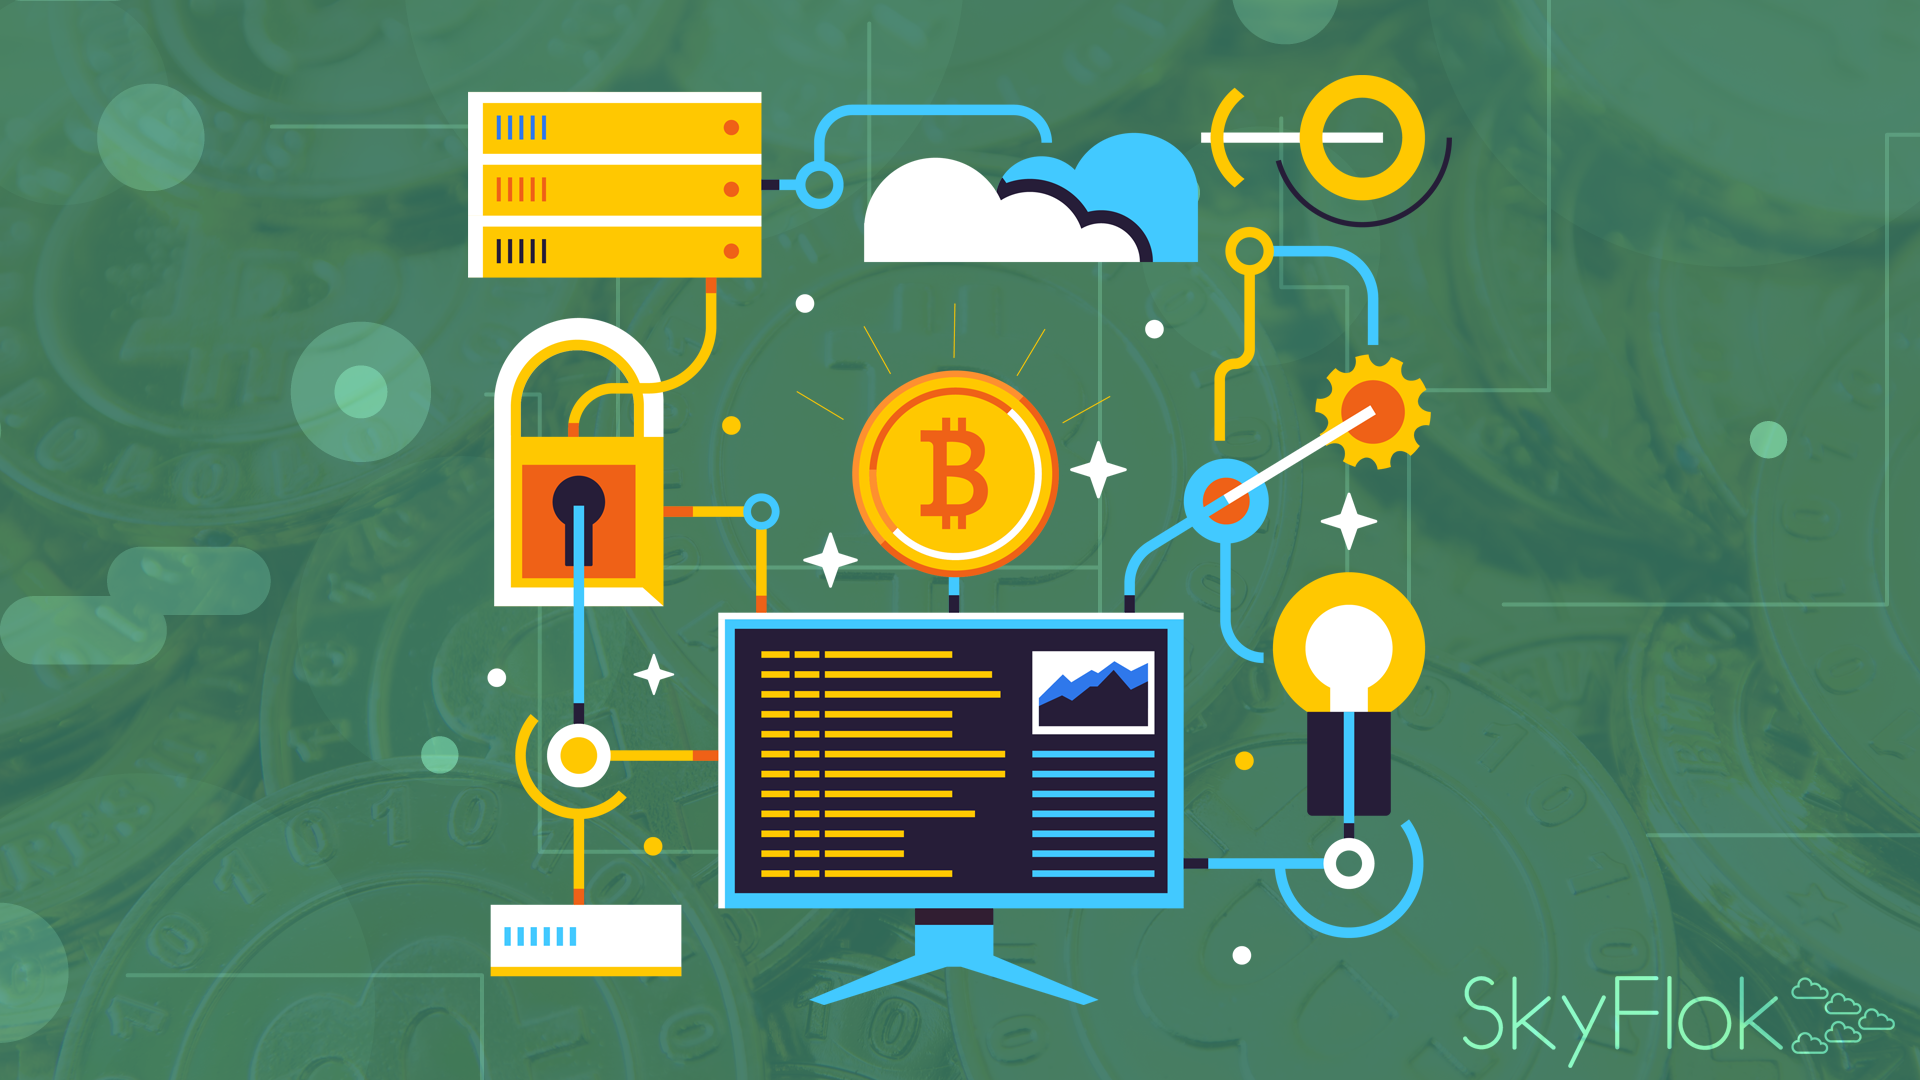 Latest Cloud Security Trends Report From RedLock CSI Team Highlights Serious Growth in Cryptojacking, Continuing Lack of Compliance with Industry Standards